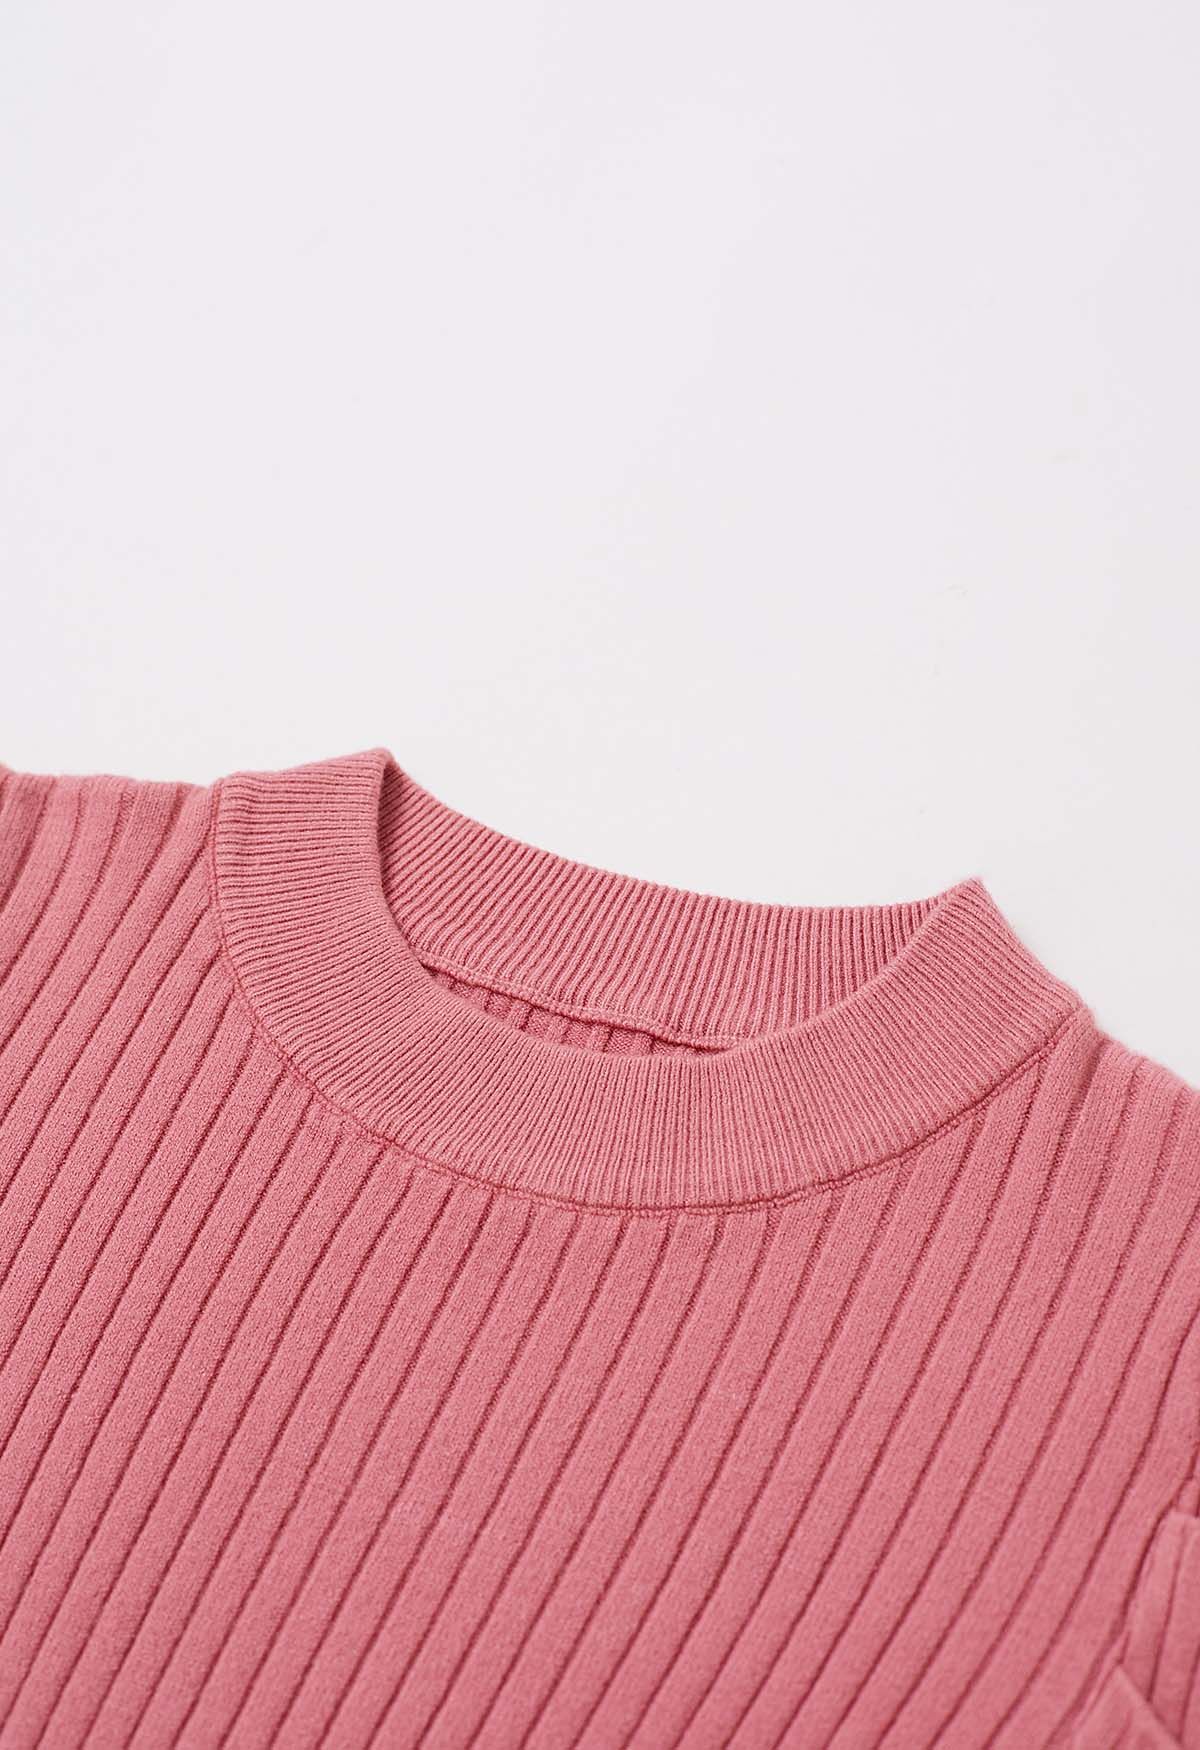 Modern Gigot Sleeves Rib Knit Top in Pink - Retro, Indie and Unique Fashion